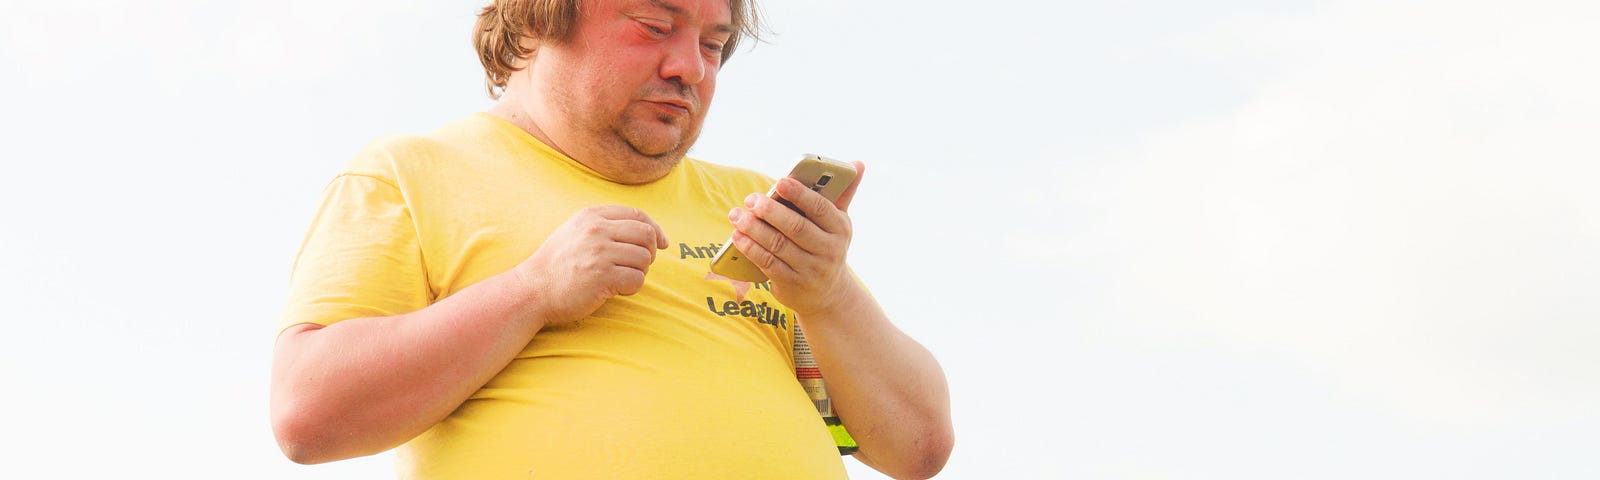 man in yellow t shirt with his belly hanging out